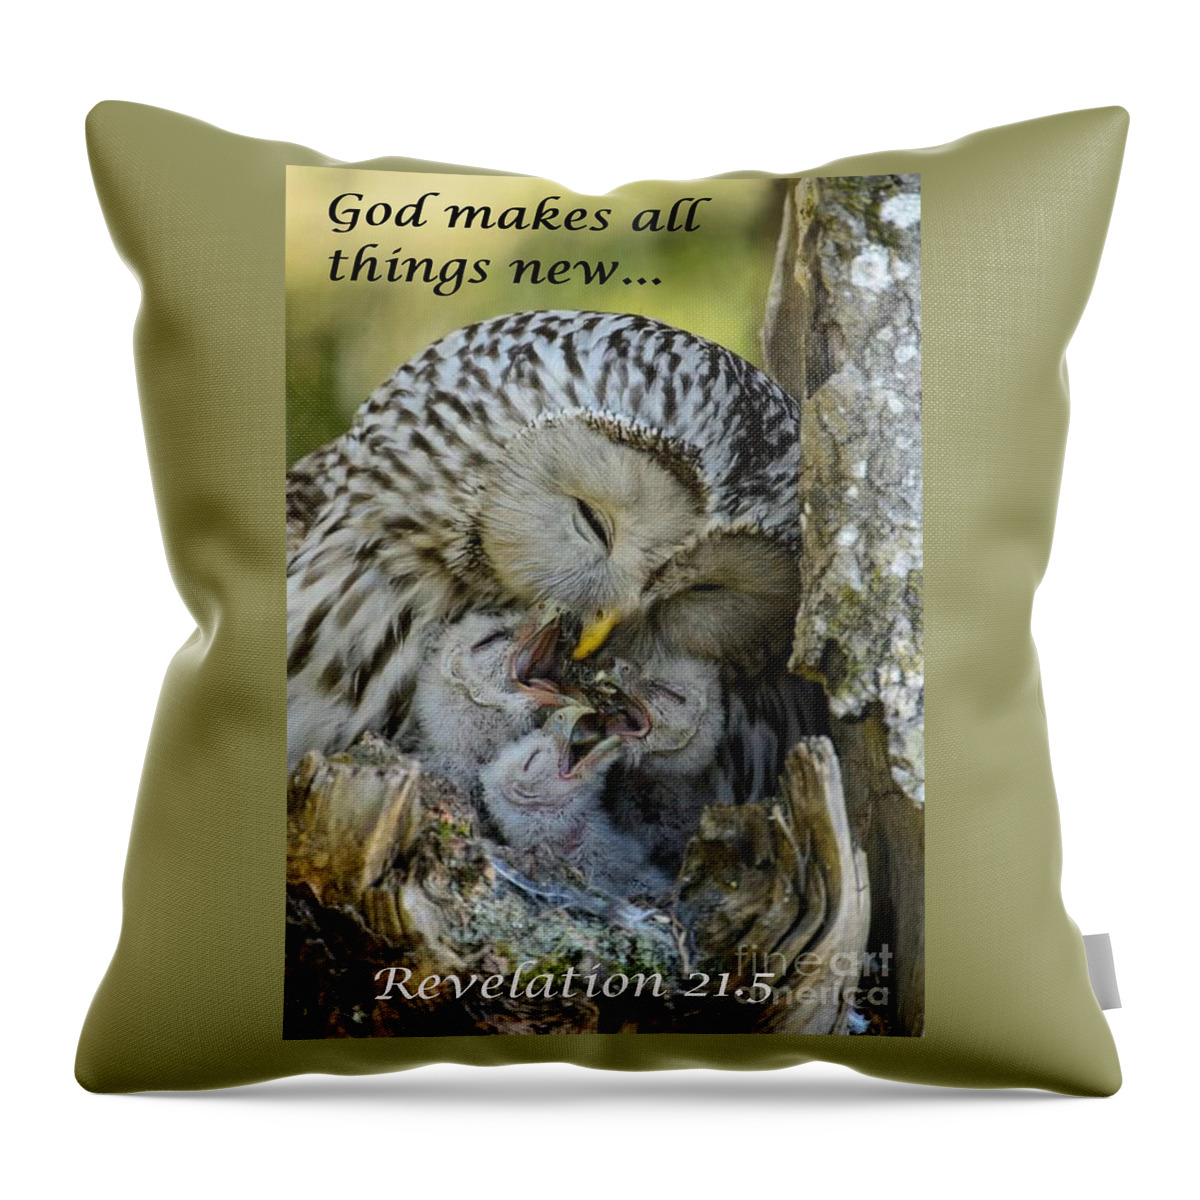  Throw Pillow featuring the photograph All Things New by Terrie Sizemore